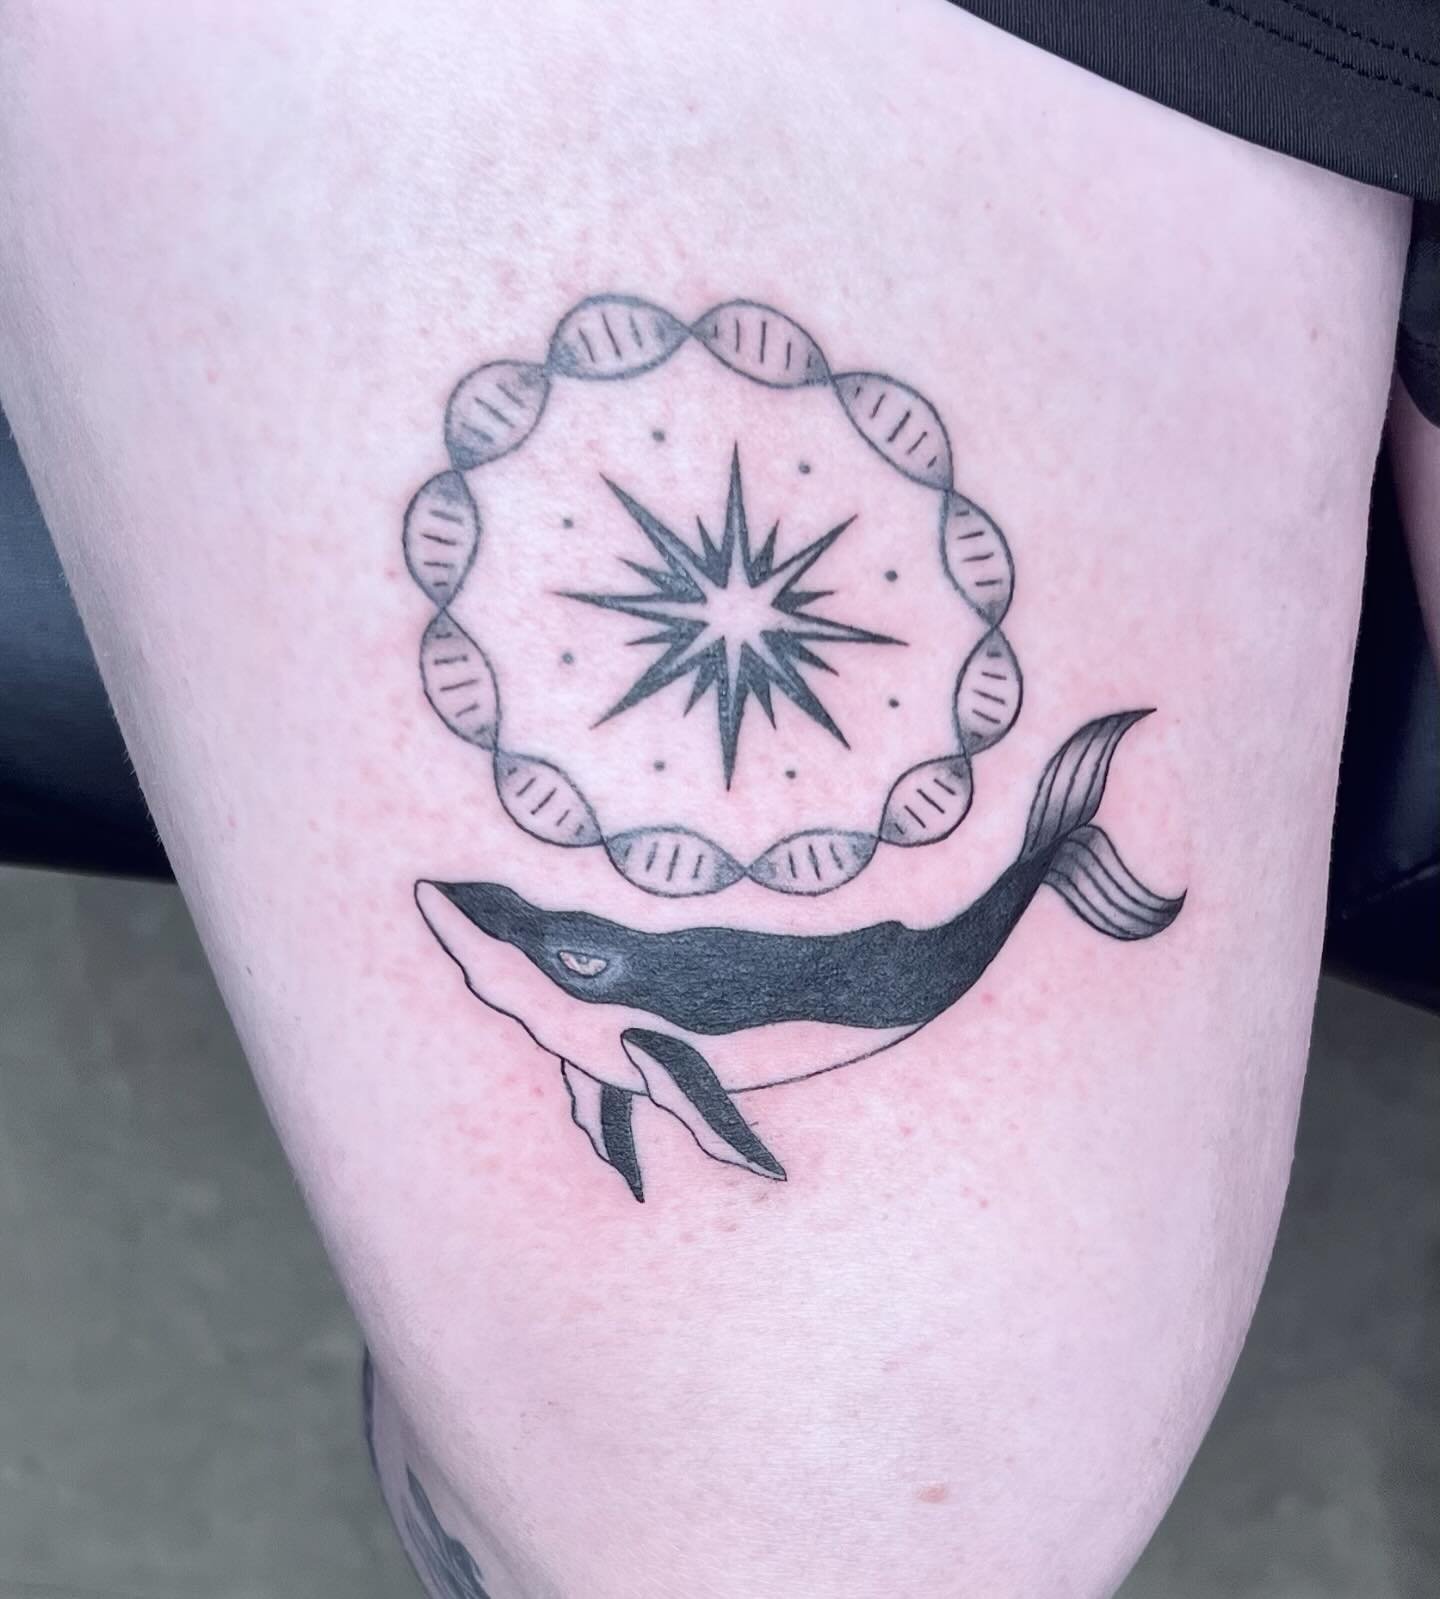 Whale medicine is the medicine of deep rememberance. 
This was my first tattoo out of my apprenticeship last year we finally touched up yesterday ✨ thank you to my long time friend @fahlleeeee for being my first unofficial and first official skin lov